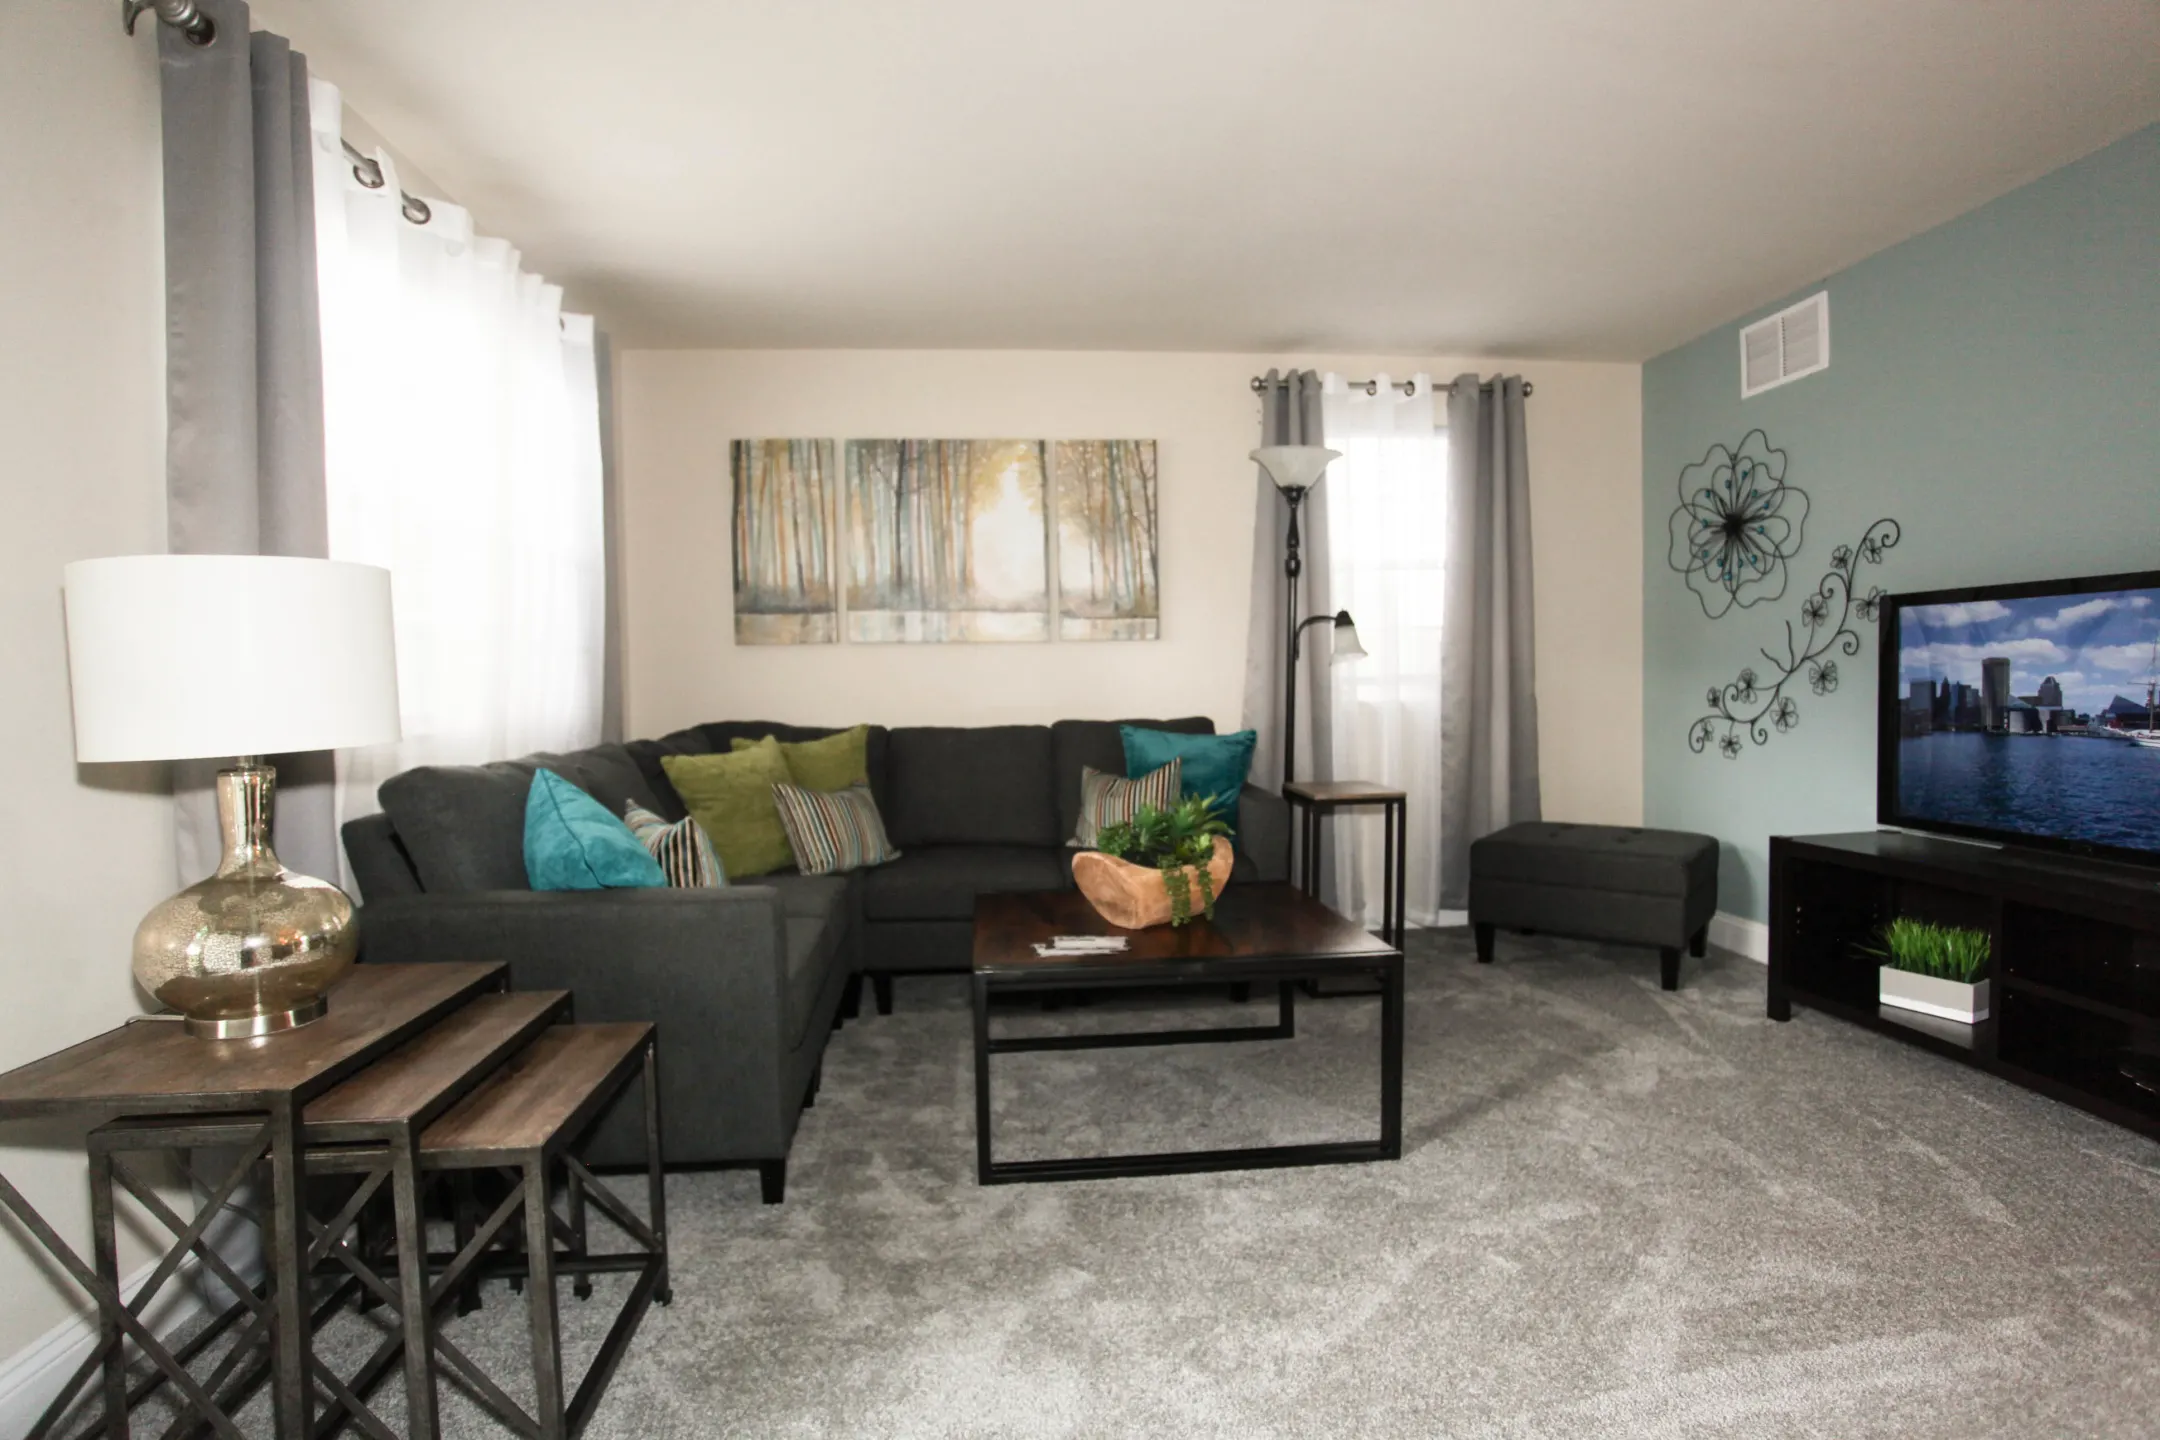 Living Room - Gardenvillage Apartments & Townhouses - Baltimore, MD